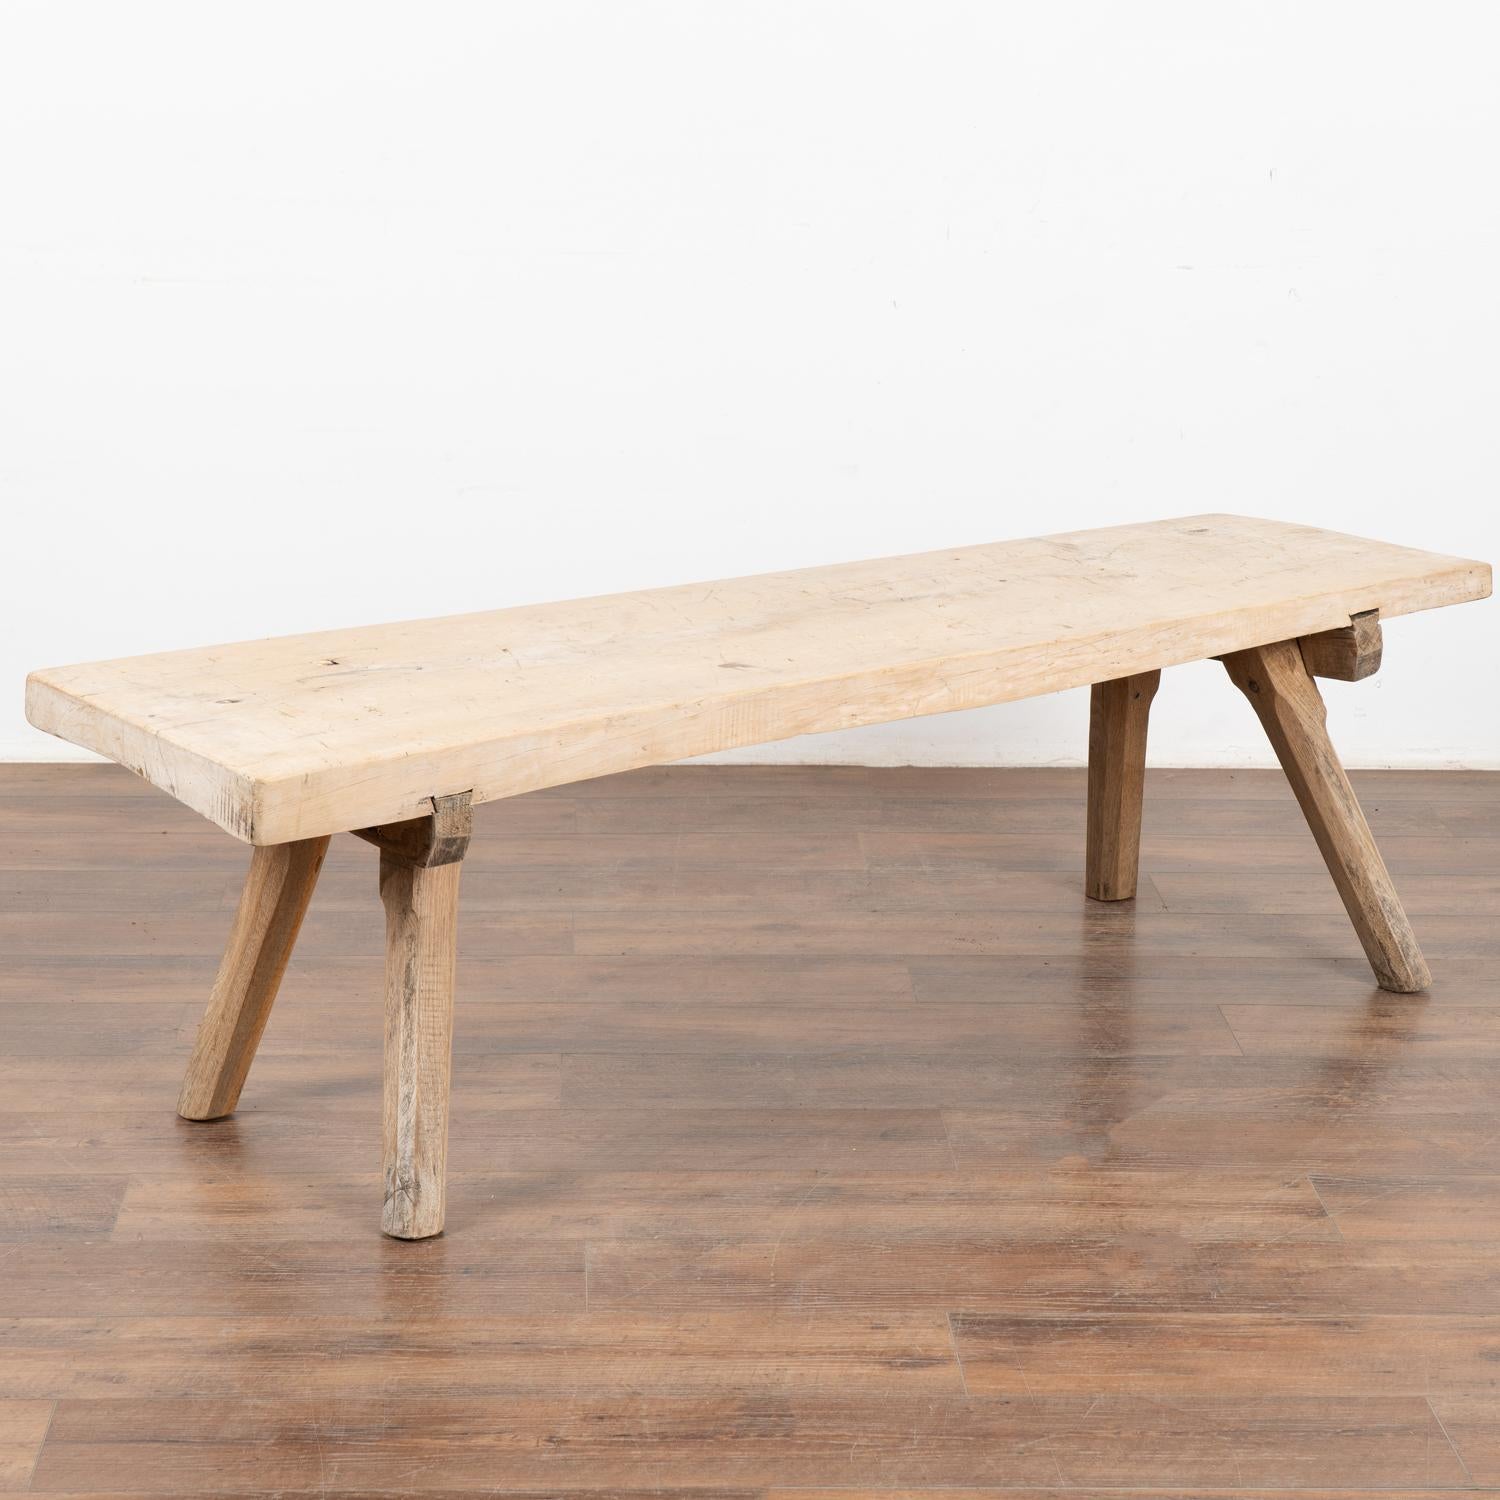 The appeal of this coffee table comes from the rustic wood top that originally served as a work table and rests on original thick peg legs. 
The many scratches, nicks, deep gouges, stains and old cracks that all combine to build the depth of